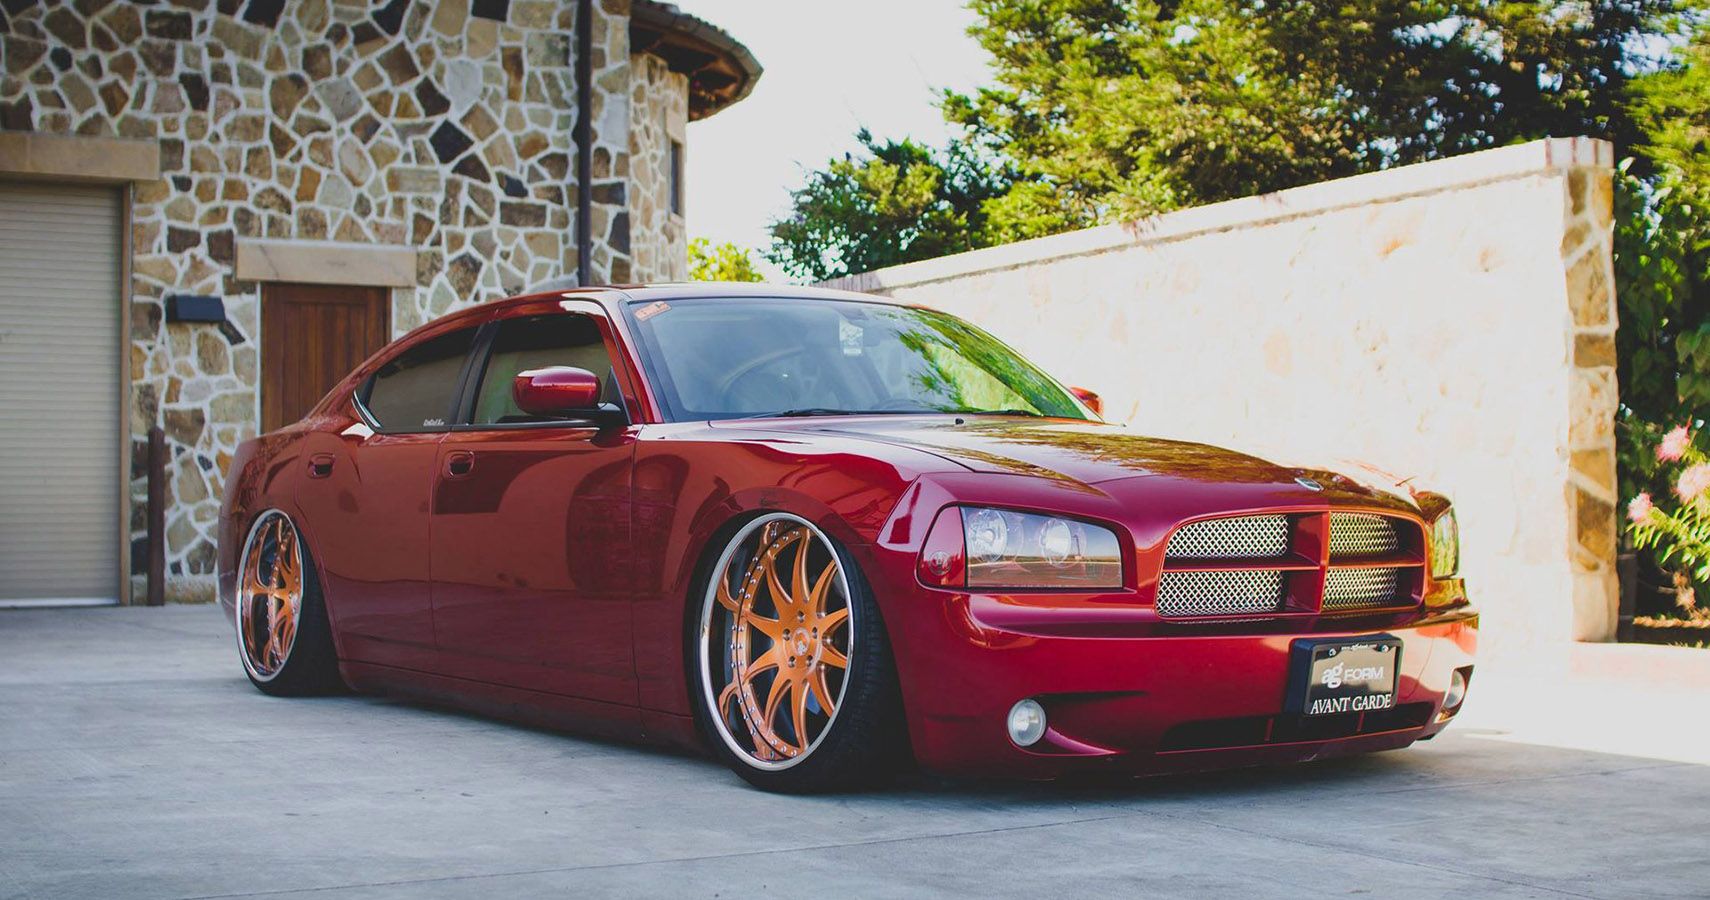 A Brand New Dodge Charger, Slammed